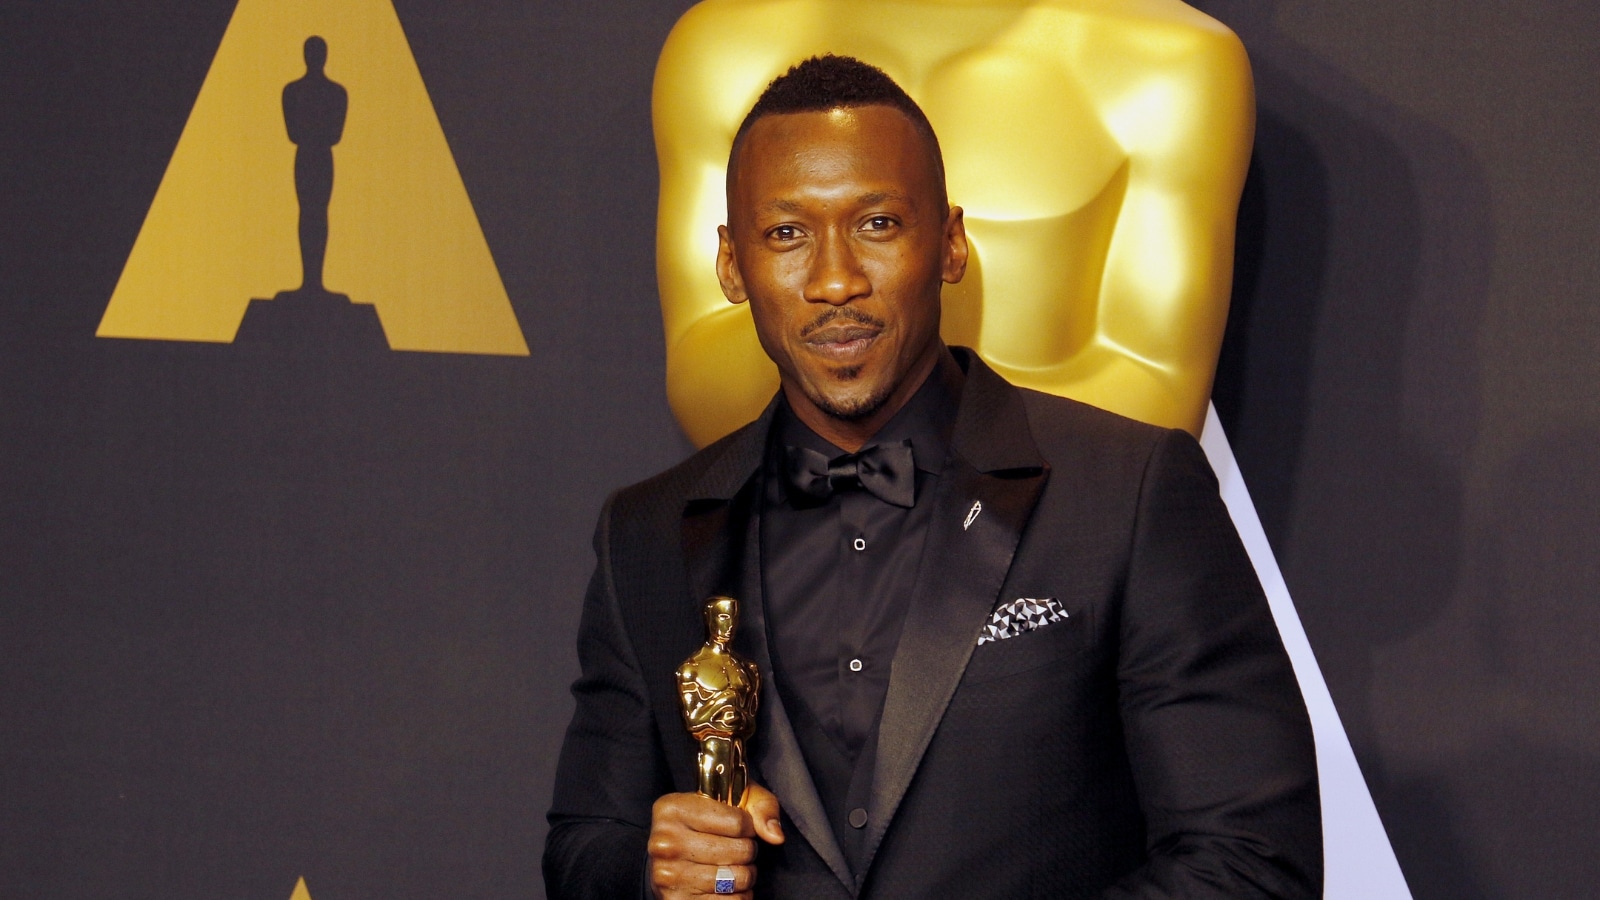 Mahershala Ali at the 89th Annual Academy Awards - Press Room held at the Hollywood and Highland Center in Hollywood, USA on February 26, 2017.